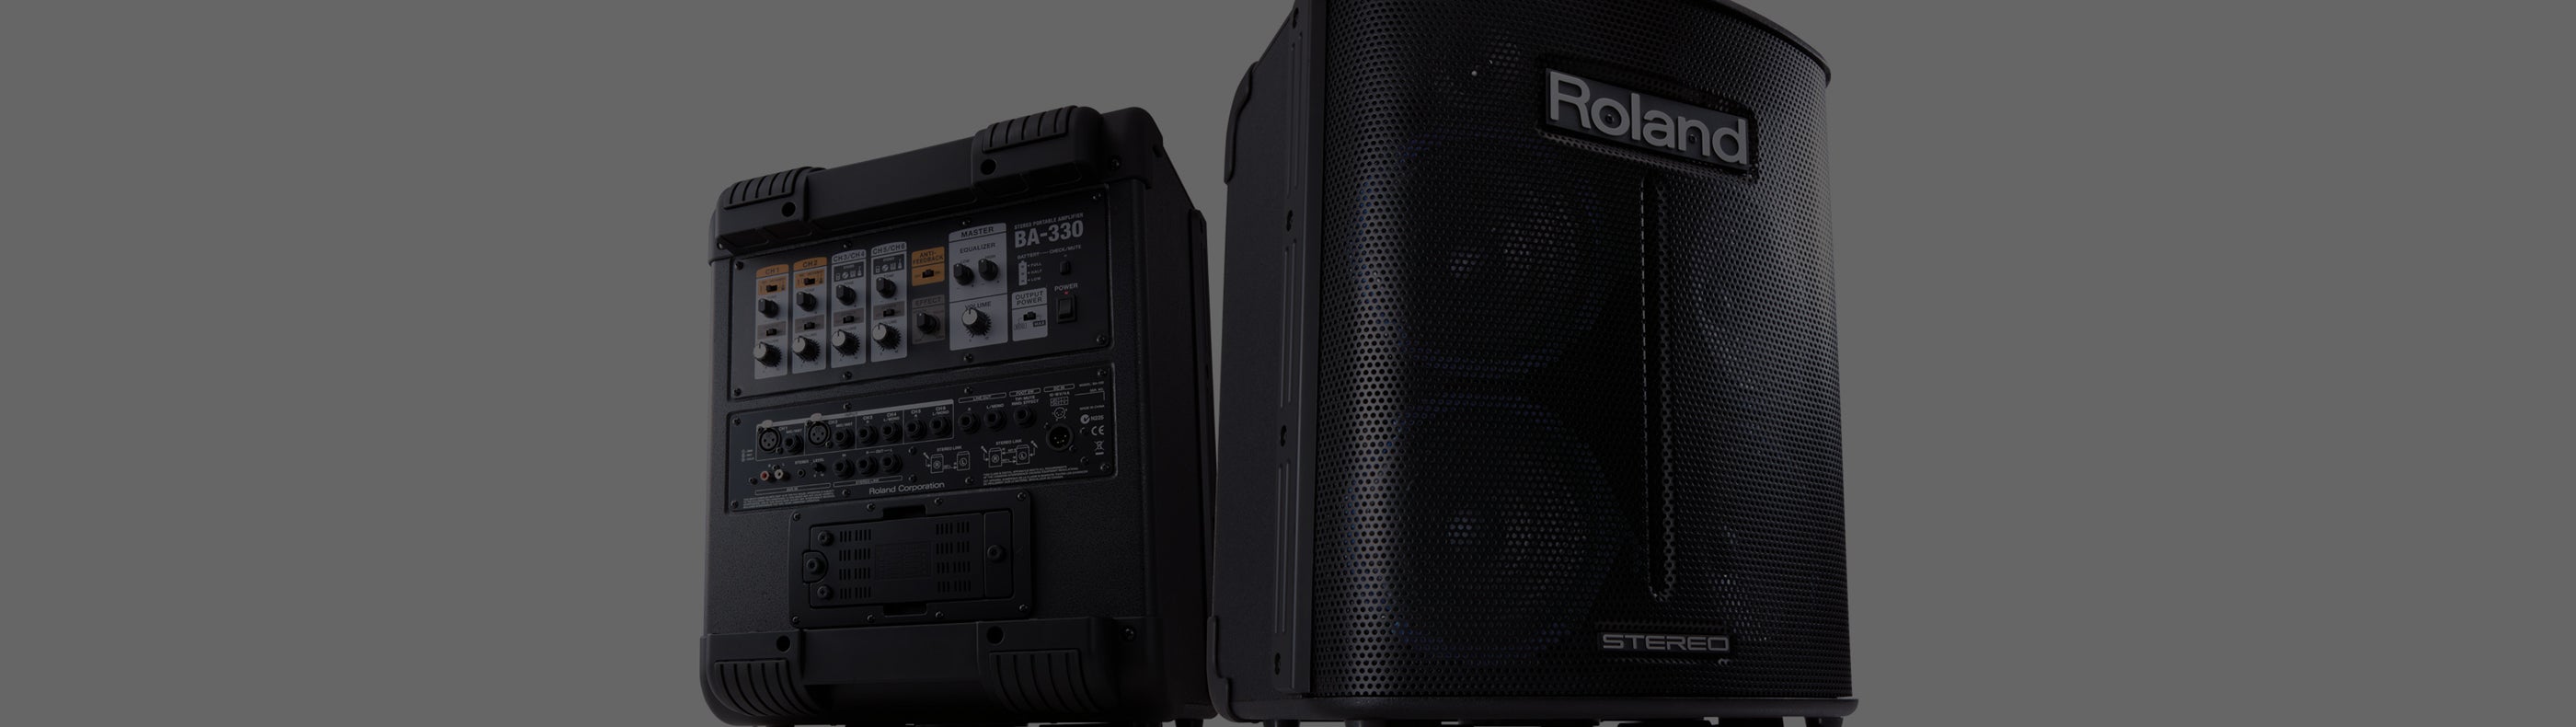 Roland Portable PA Systems